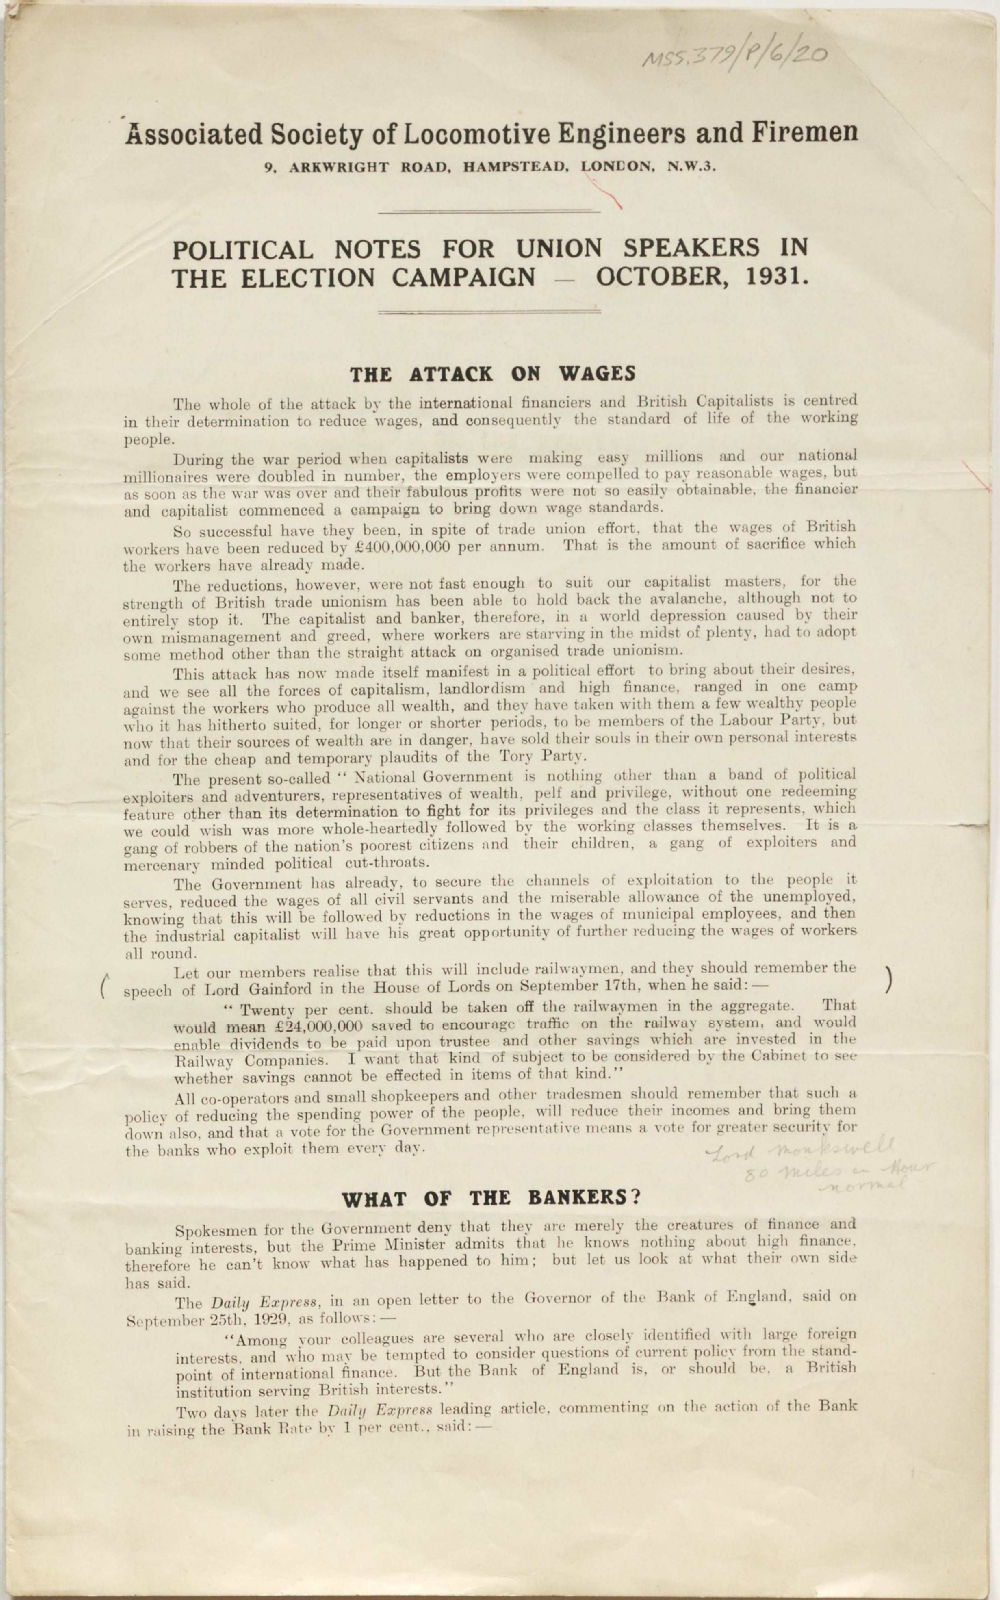 Political notes for union speakers in the general election campaign, 1931